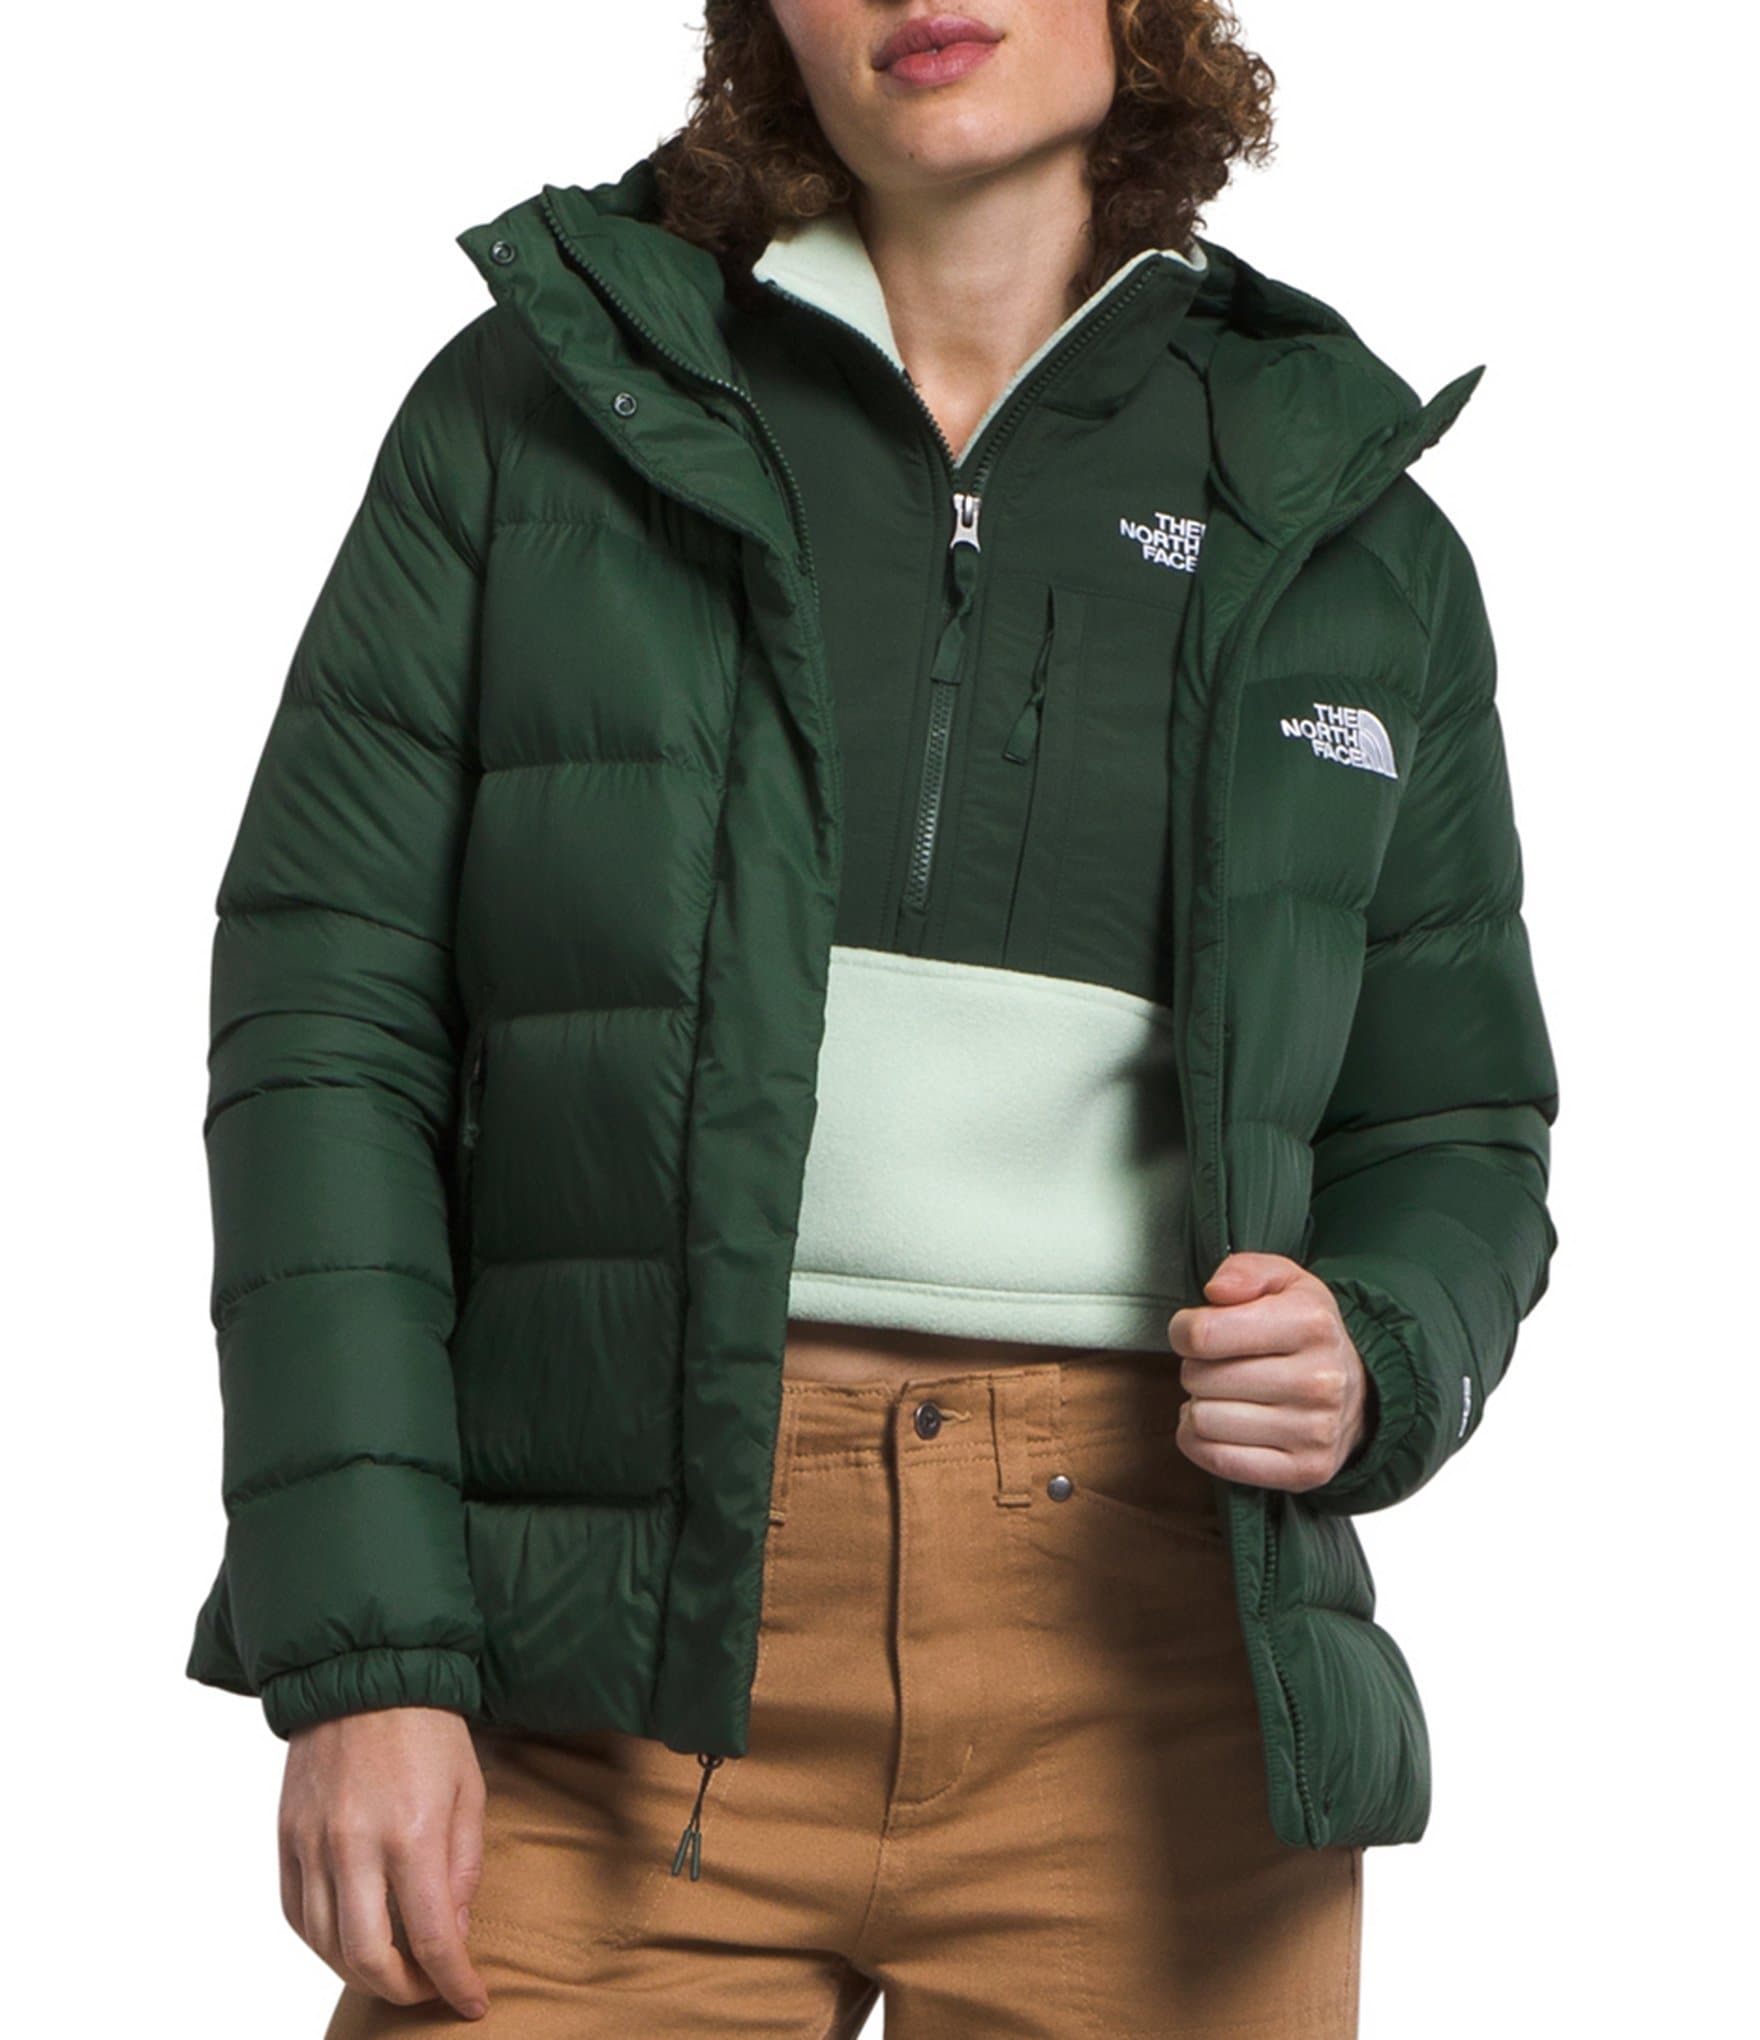 The North Face Hydrenalite Hooded Down Puffer Jacket in Natural